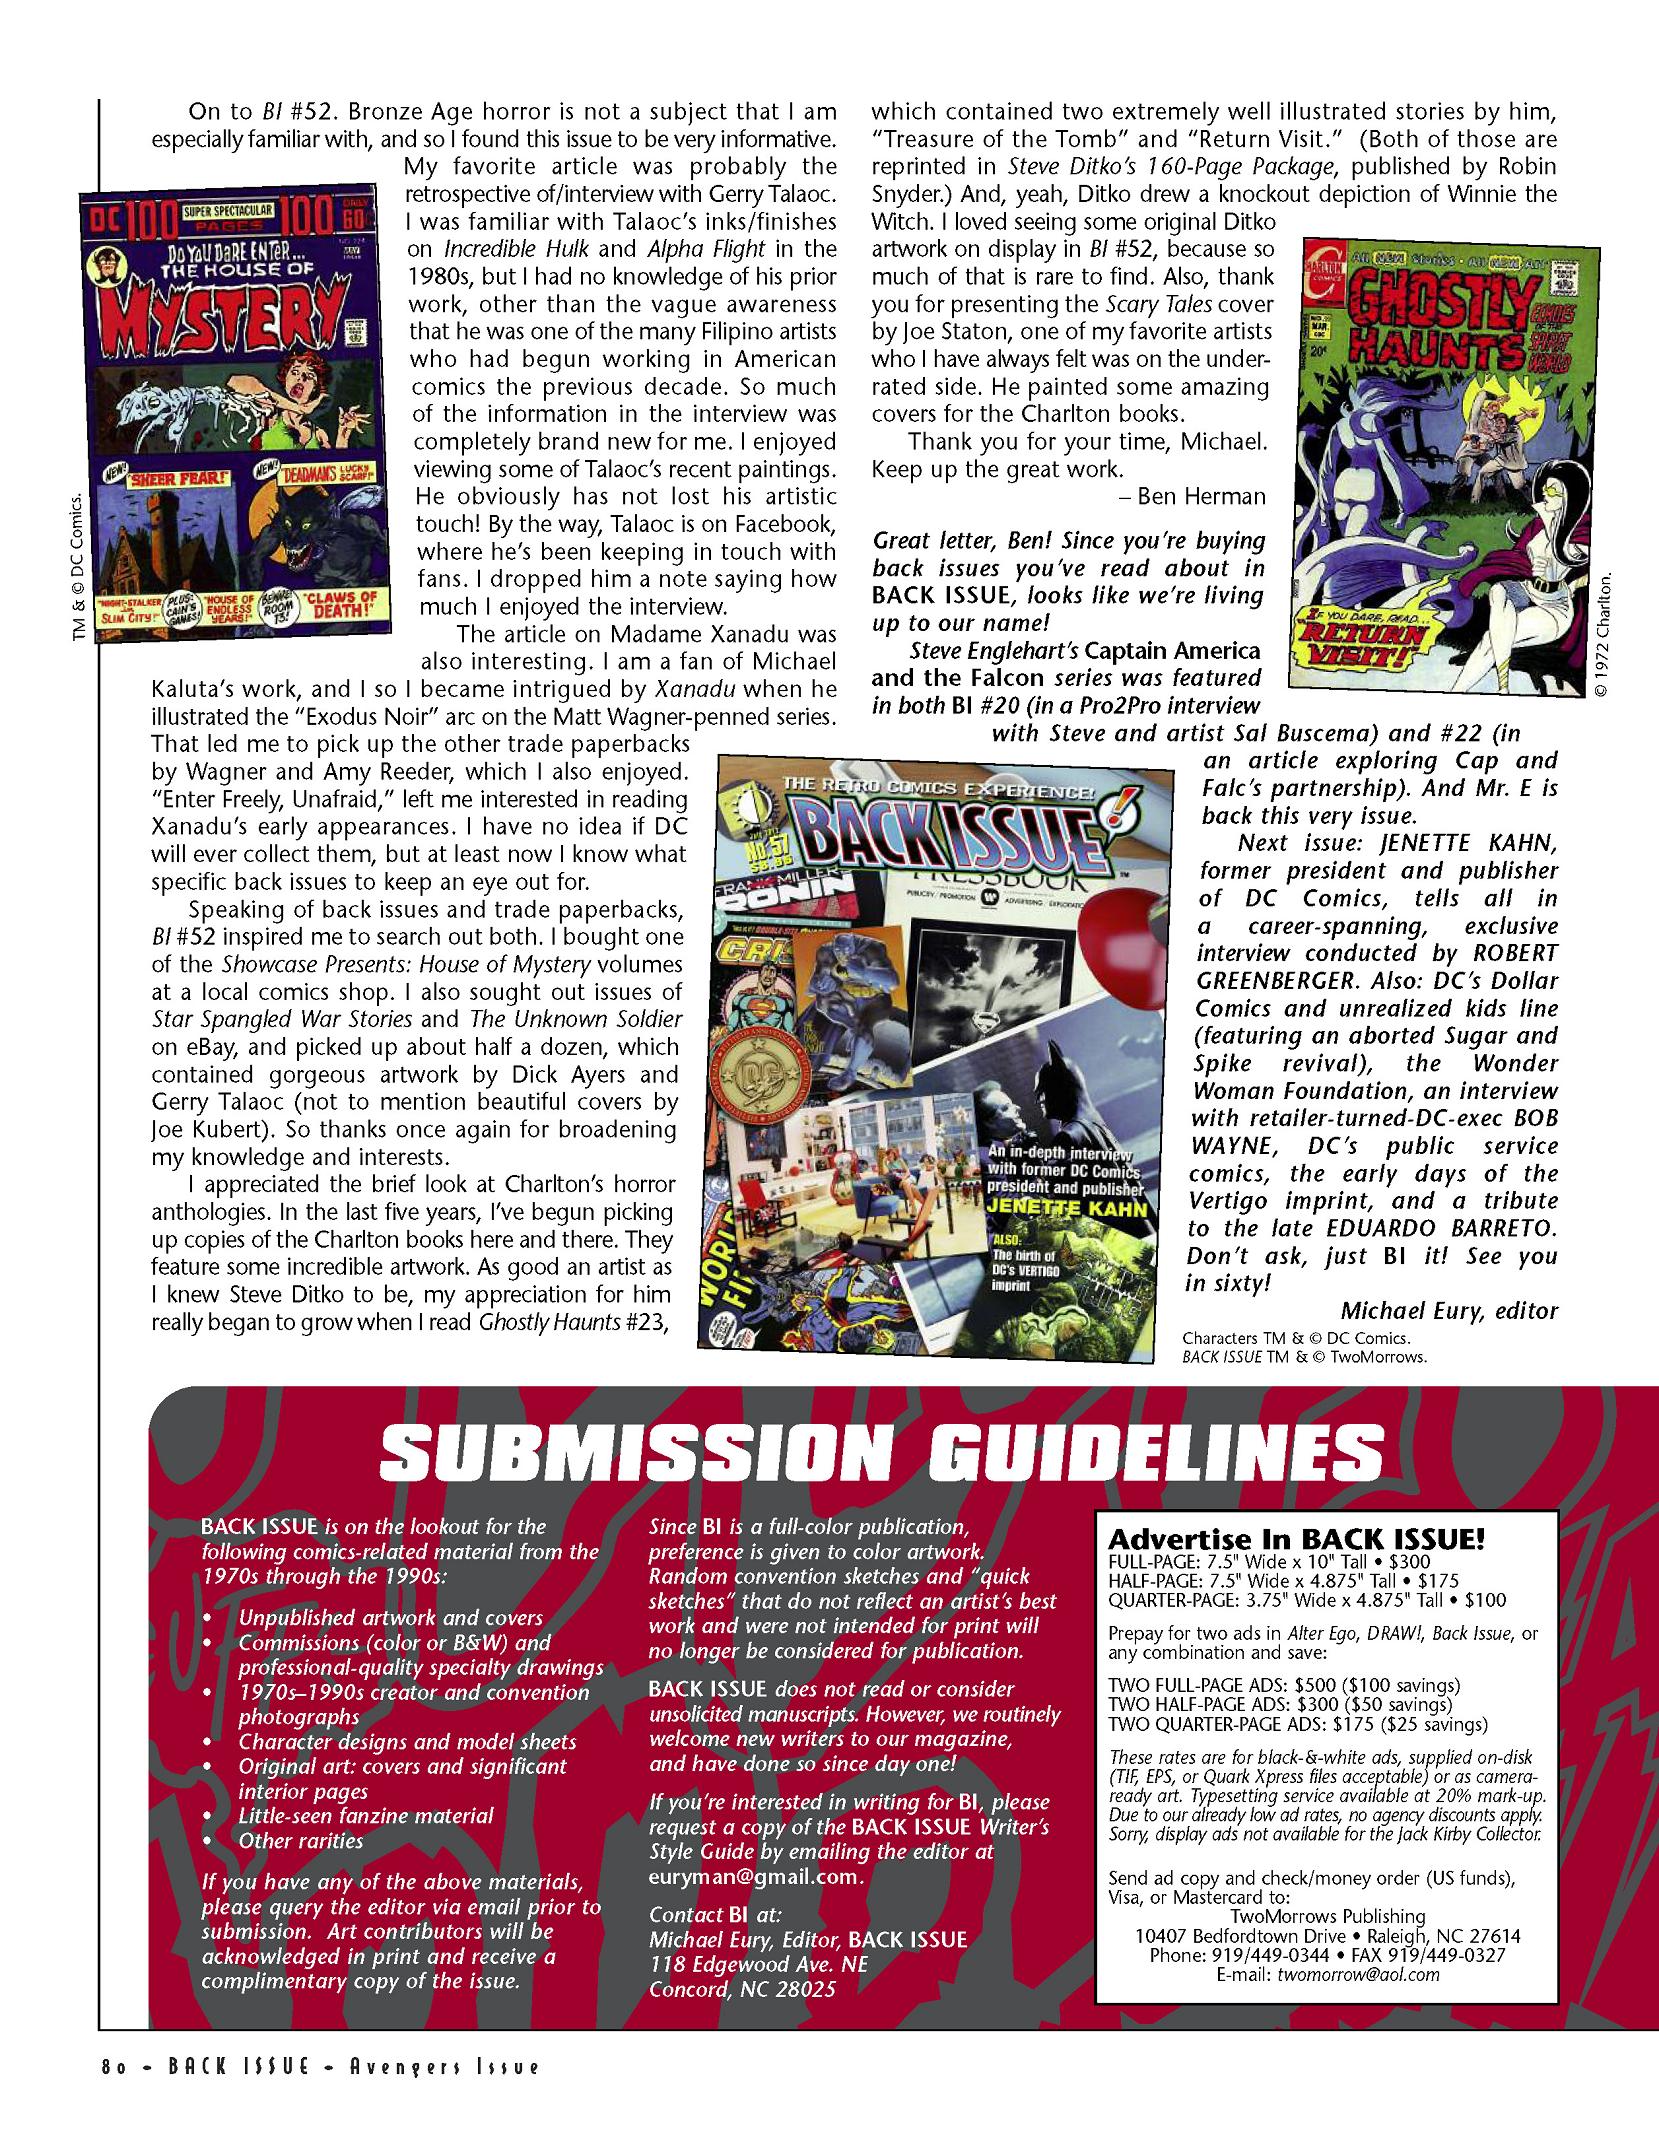 Read online Back Issue comic -  Issue #56 - 77